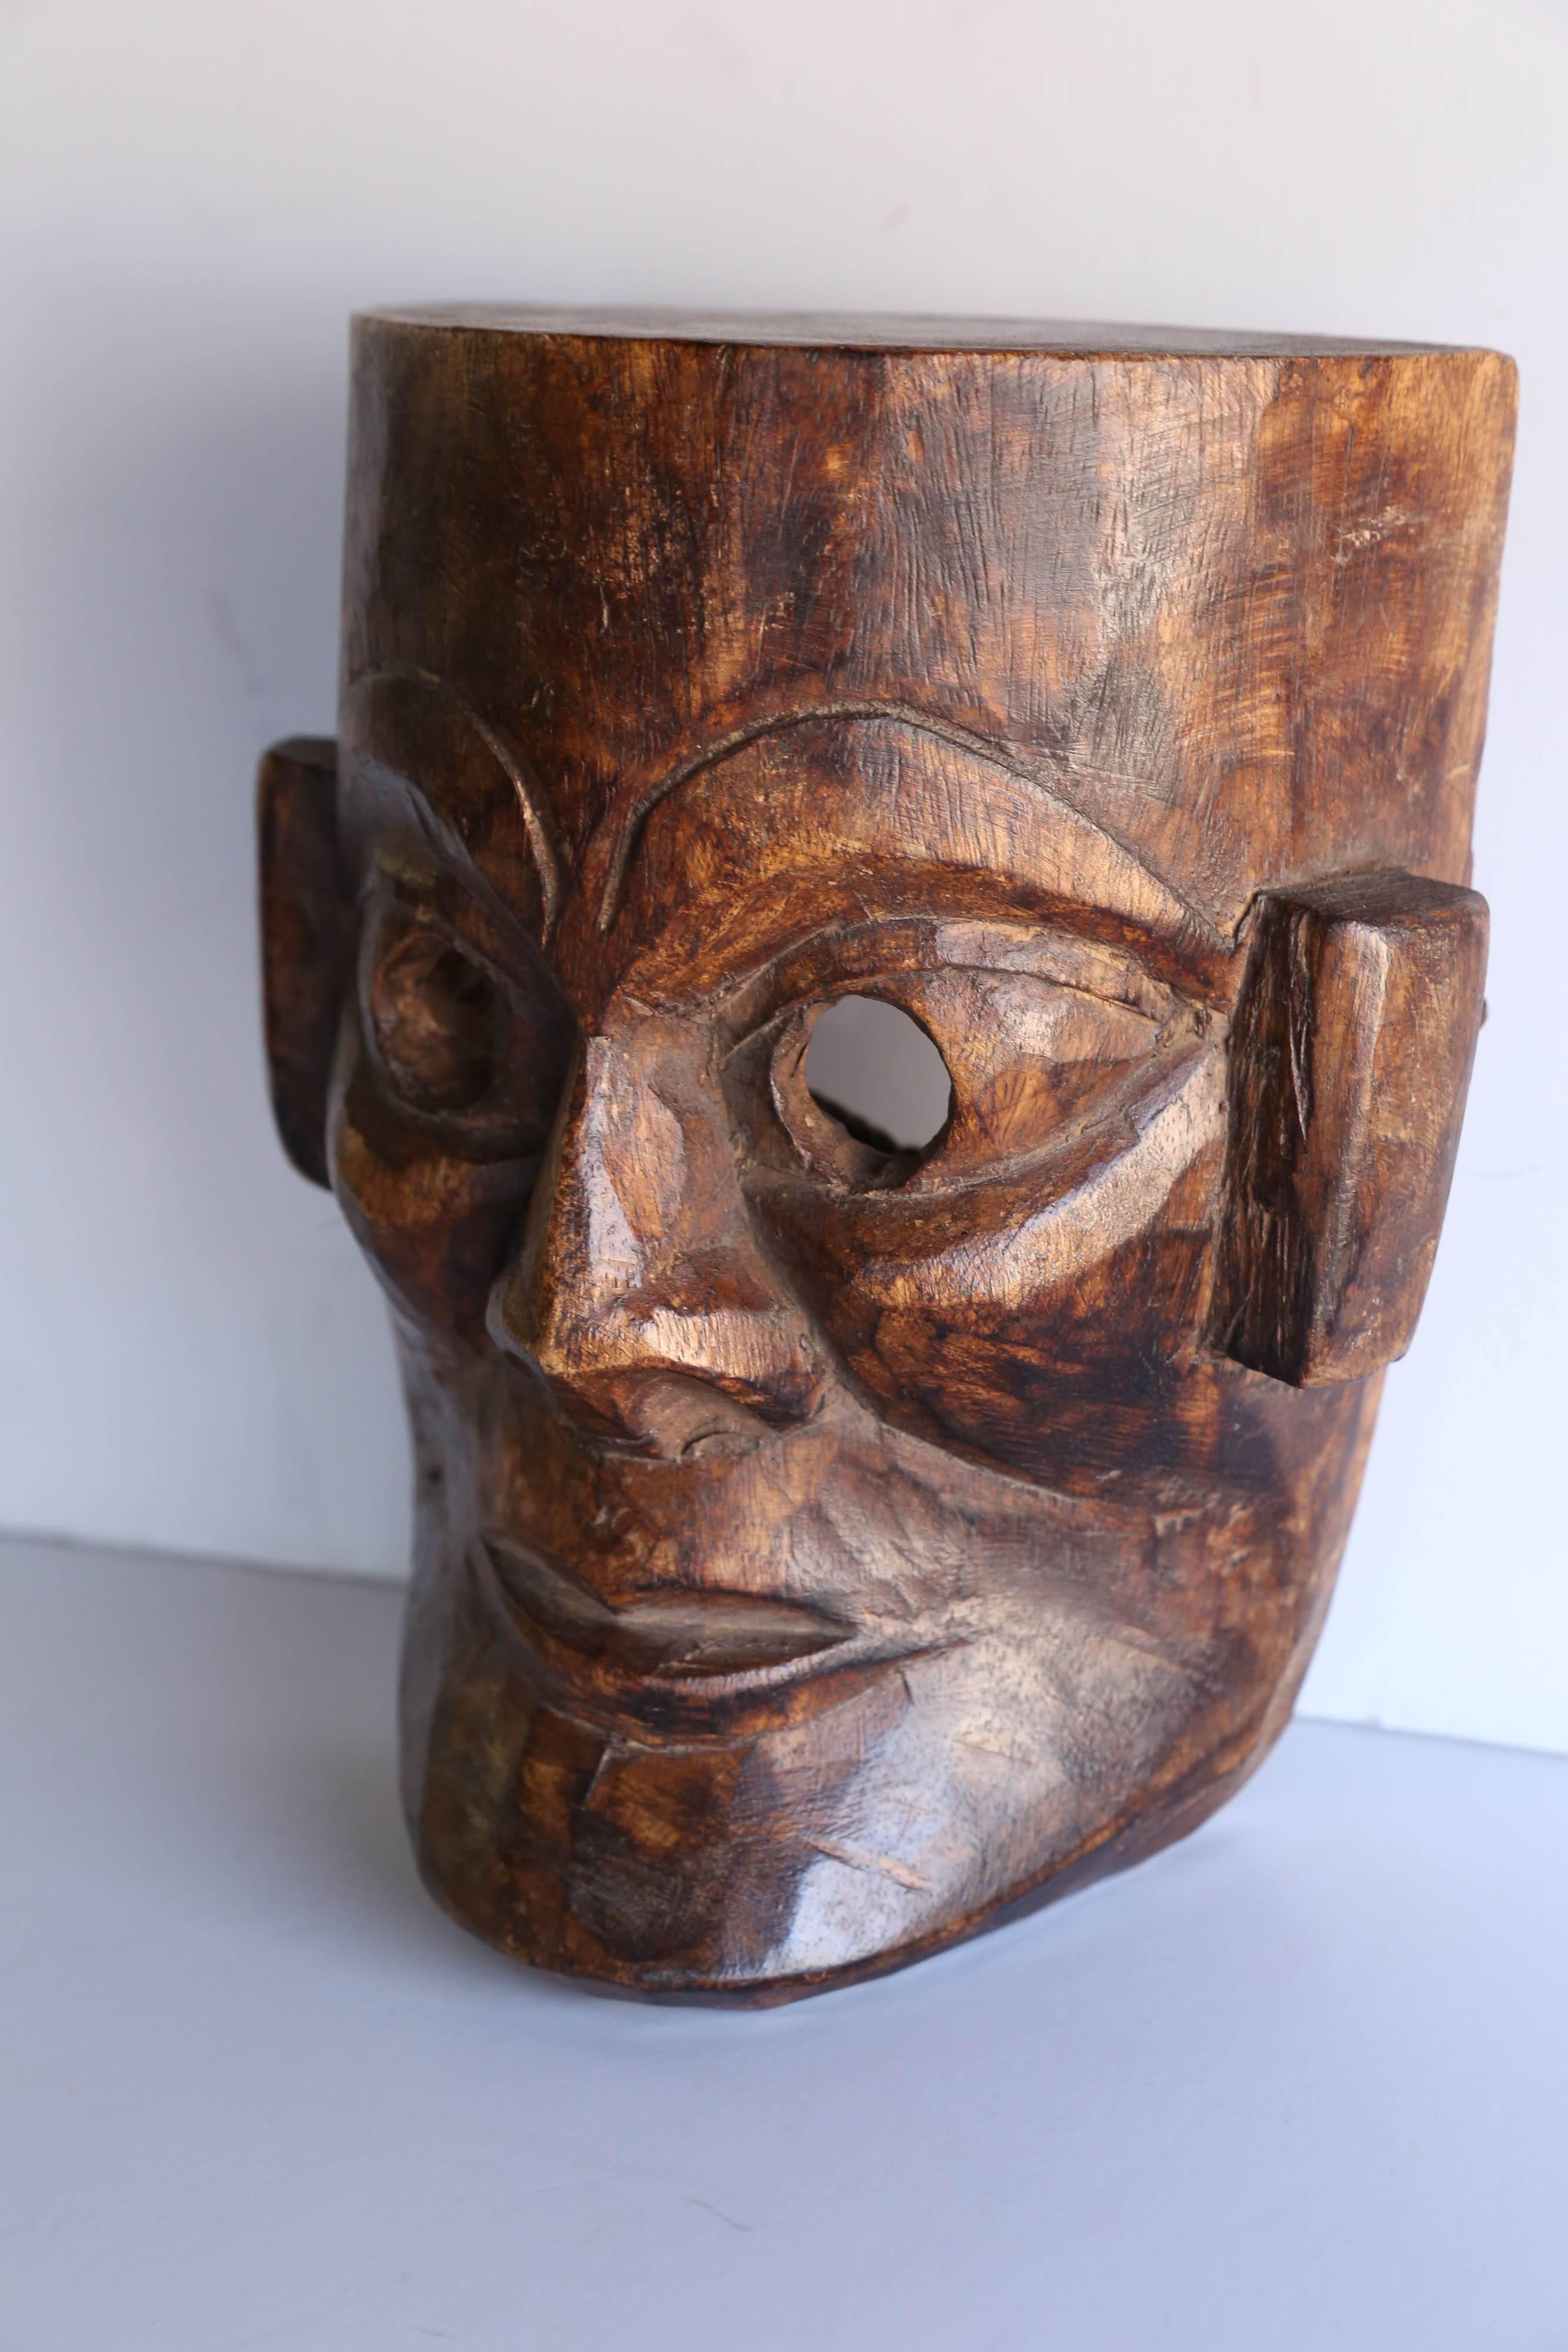 This mask was hand-carved from one piece of solid wood block. It comes from east Nepal. During festival times people wear this kind of masks and march in procession.